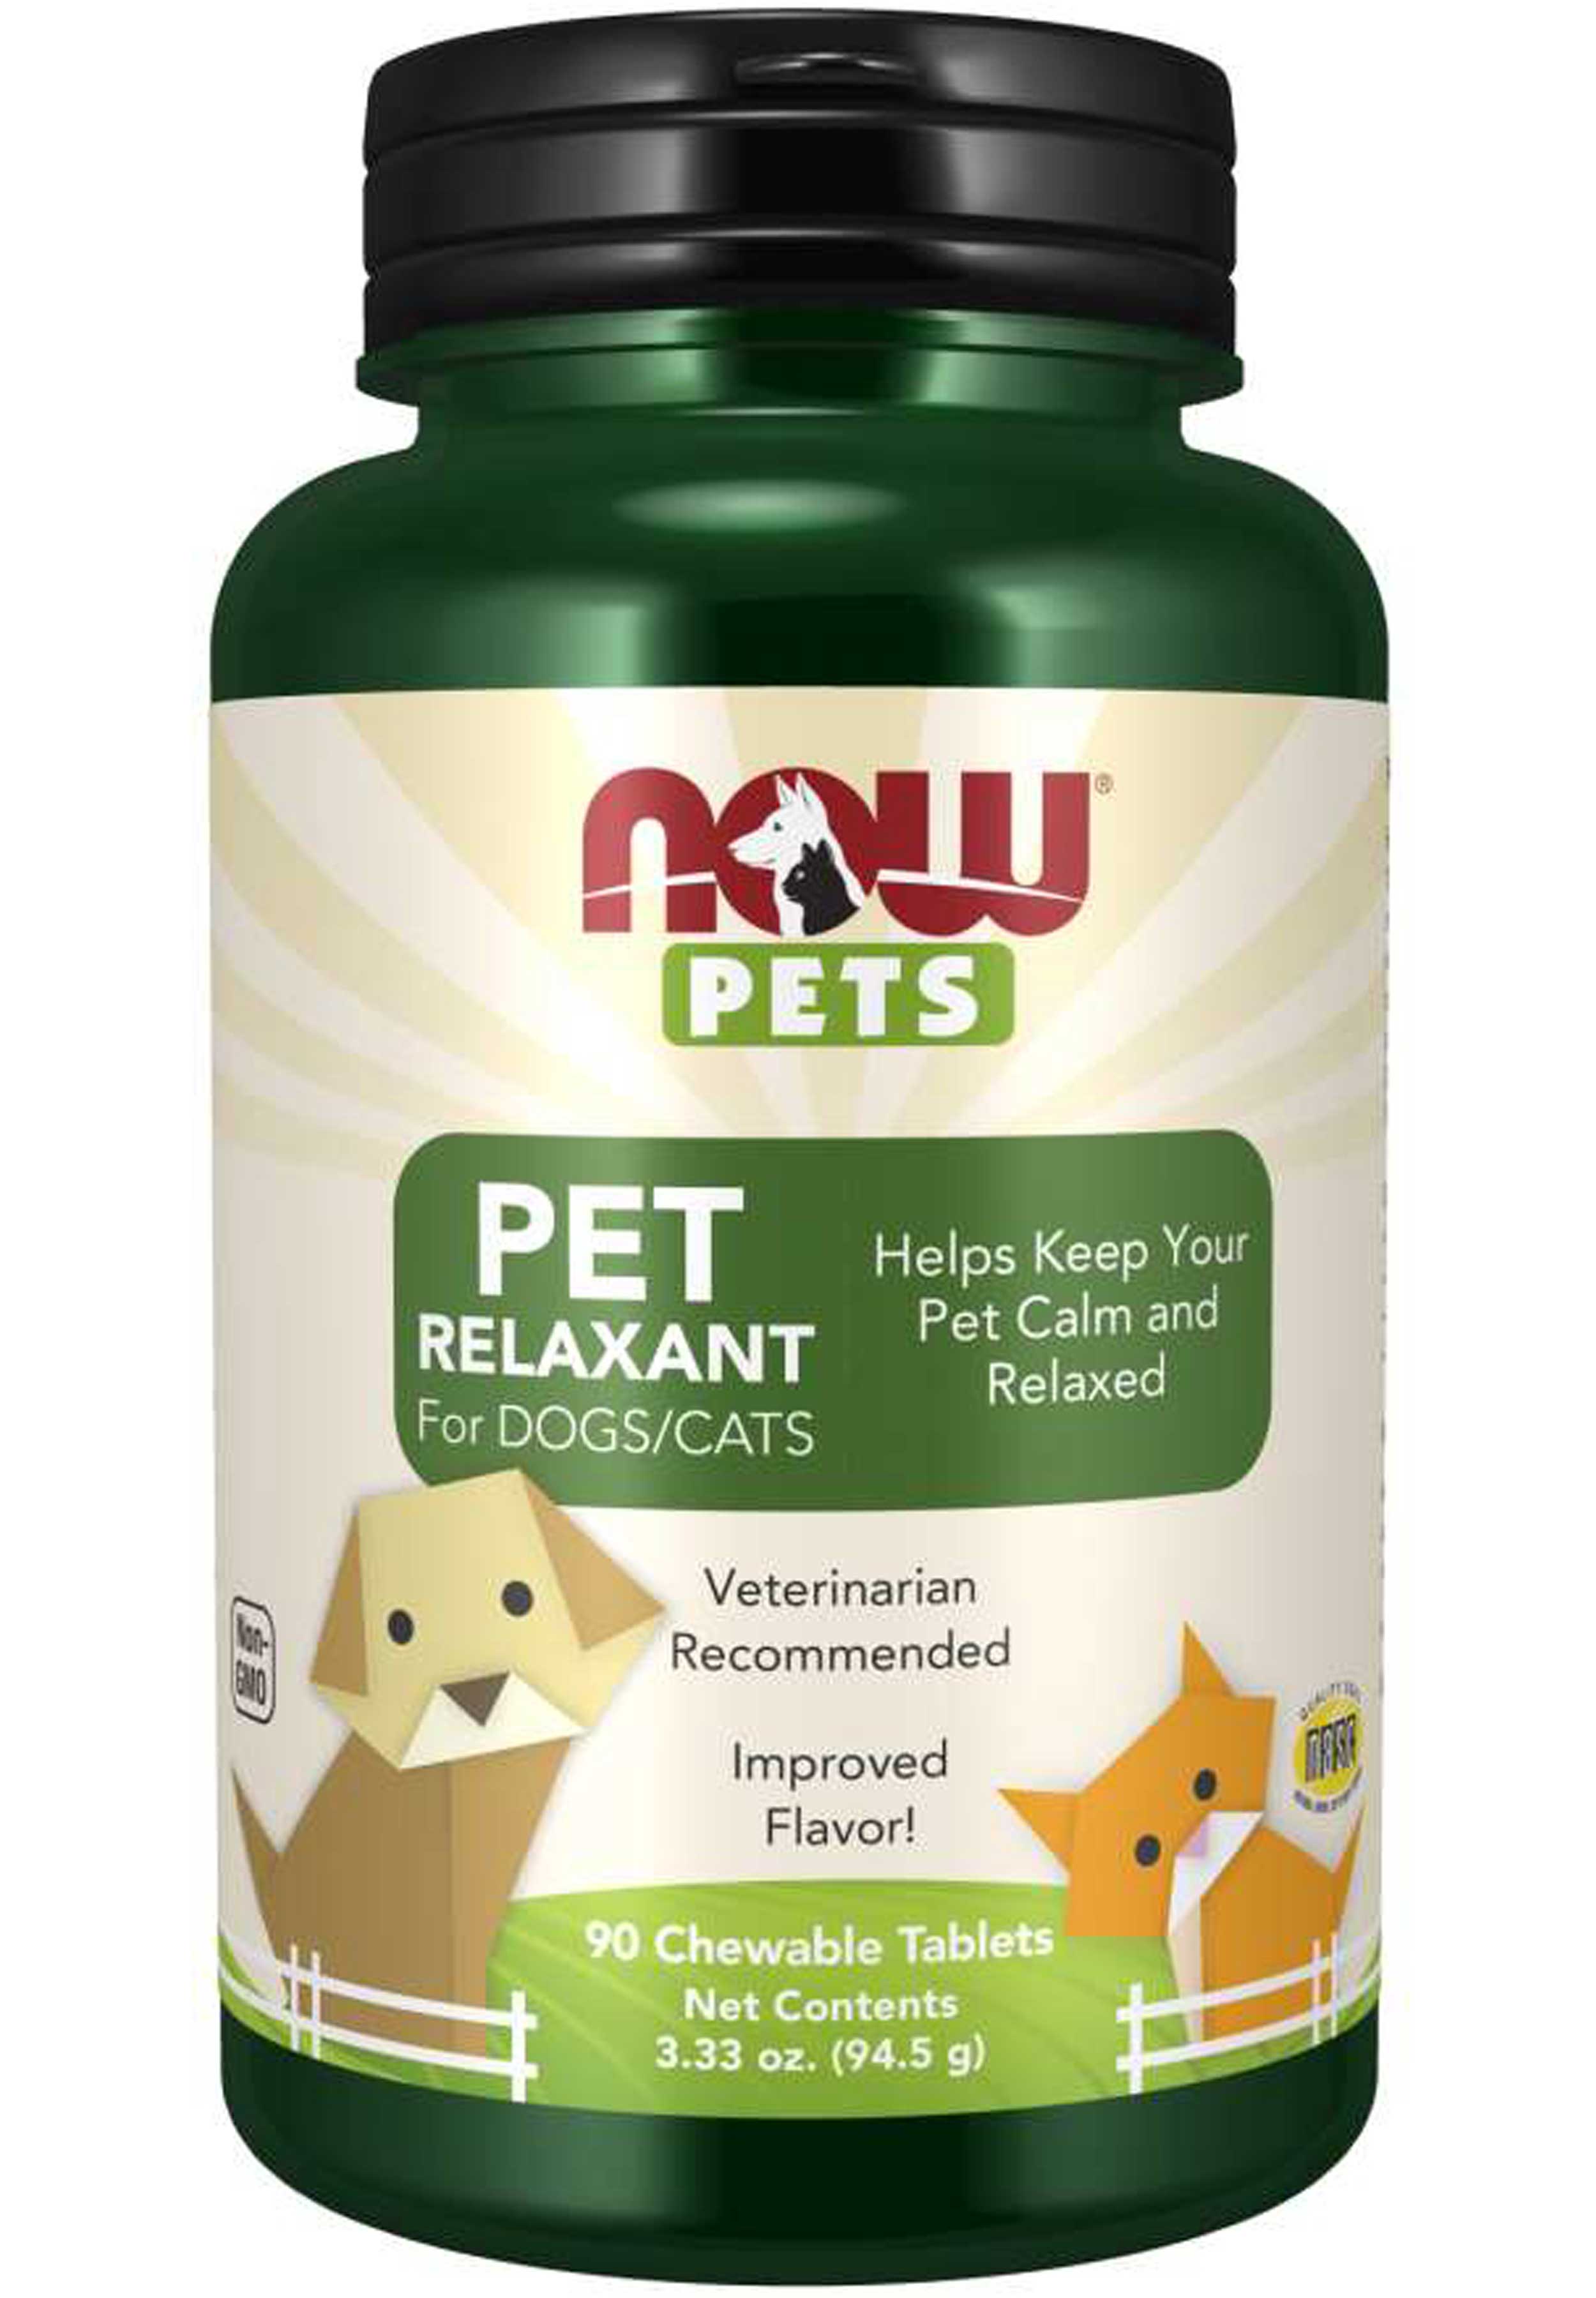 NOW Pets Relaxant for Dogs/Cats